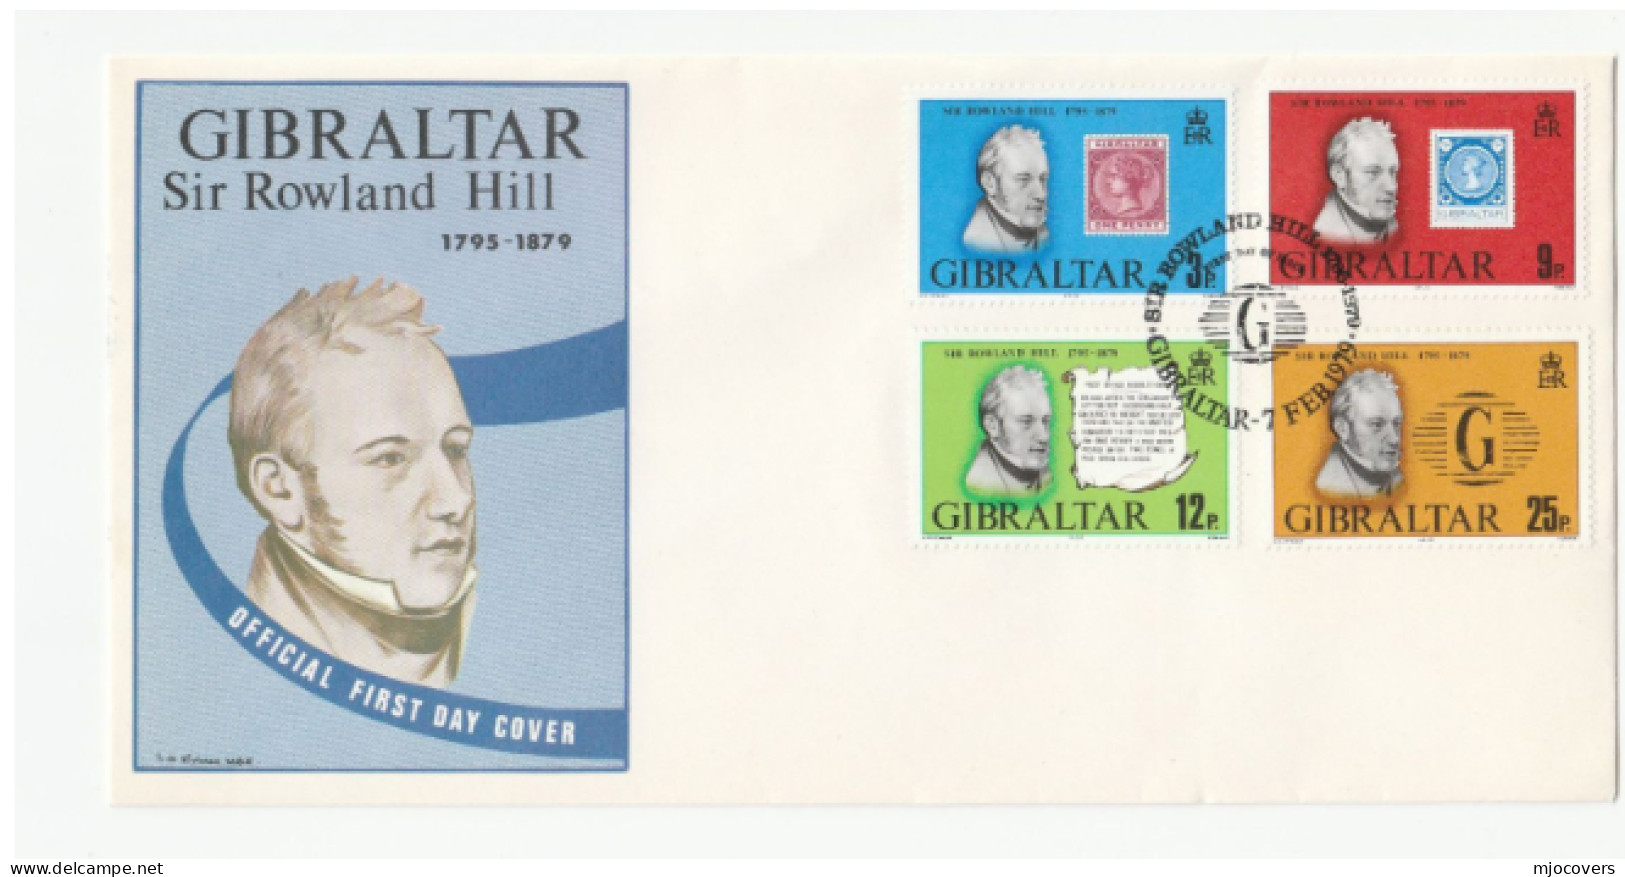 5  GIBRALTAR FDCs 1971-1982 Fdc Christmas Iyc Stamp On Stamps Military Coat Of Arms United Nations Cover - Gibraltar